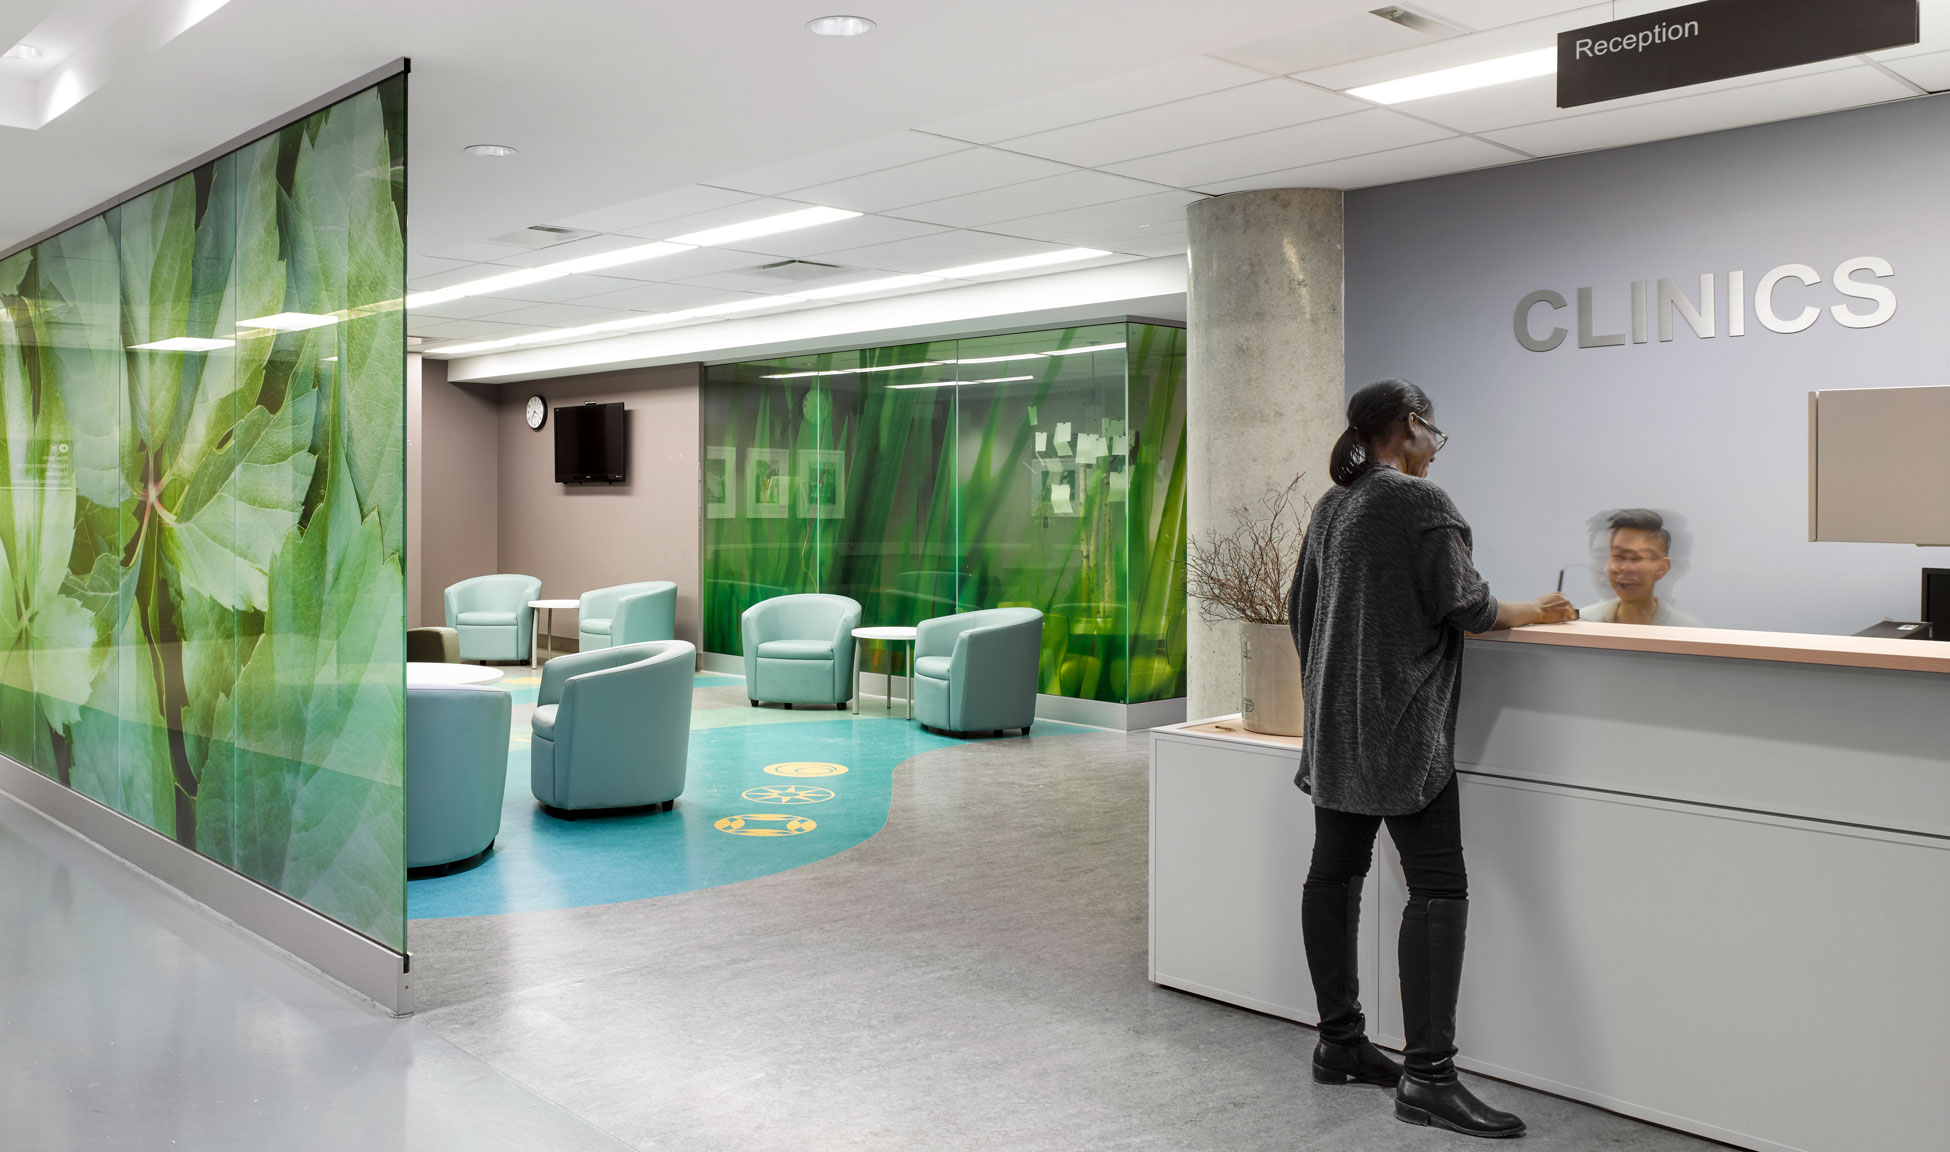 The Rise of Ambulatory Care and its Impact on Design